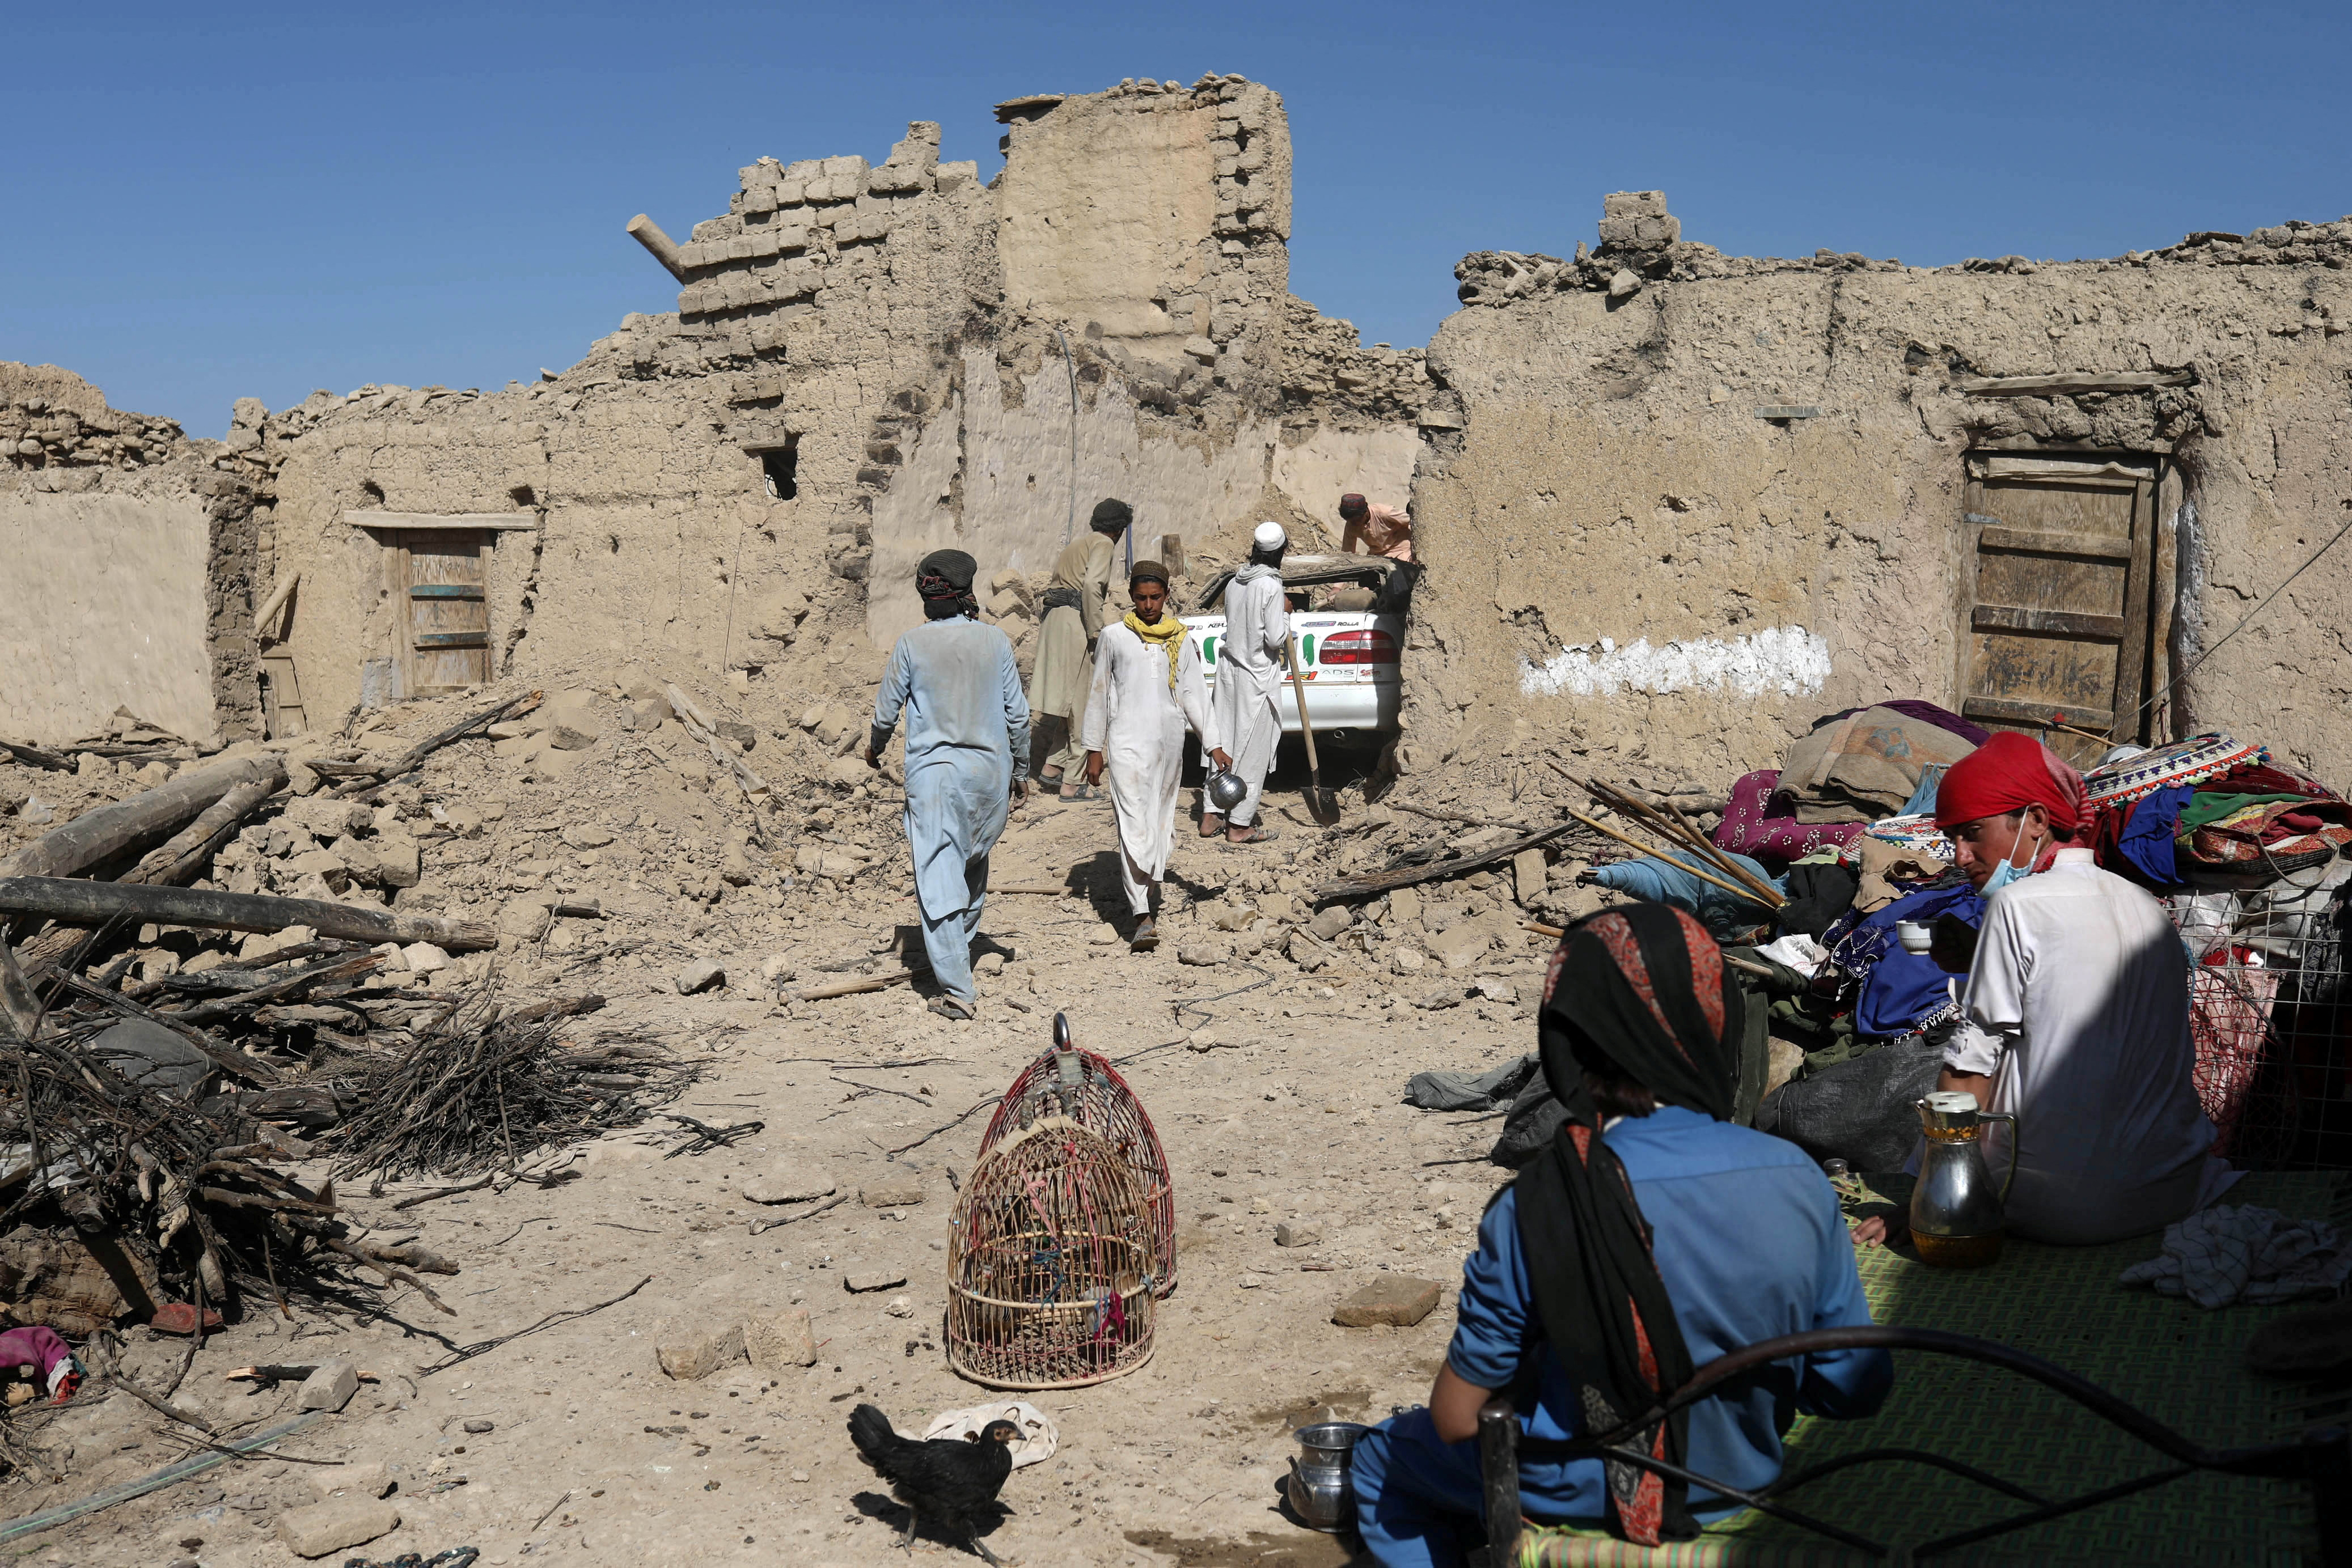 Afghan men try to retrieve a car from the debris of damaged houses after the recent earthquake in Wor Kali village